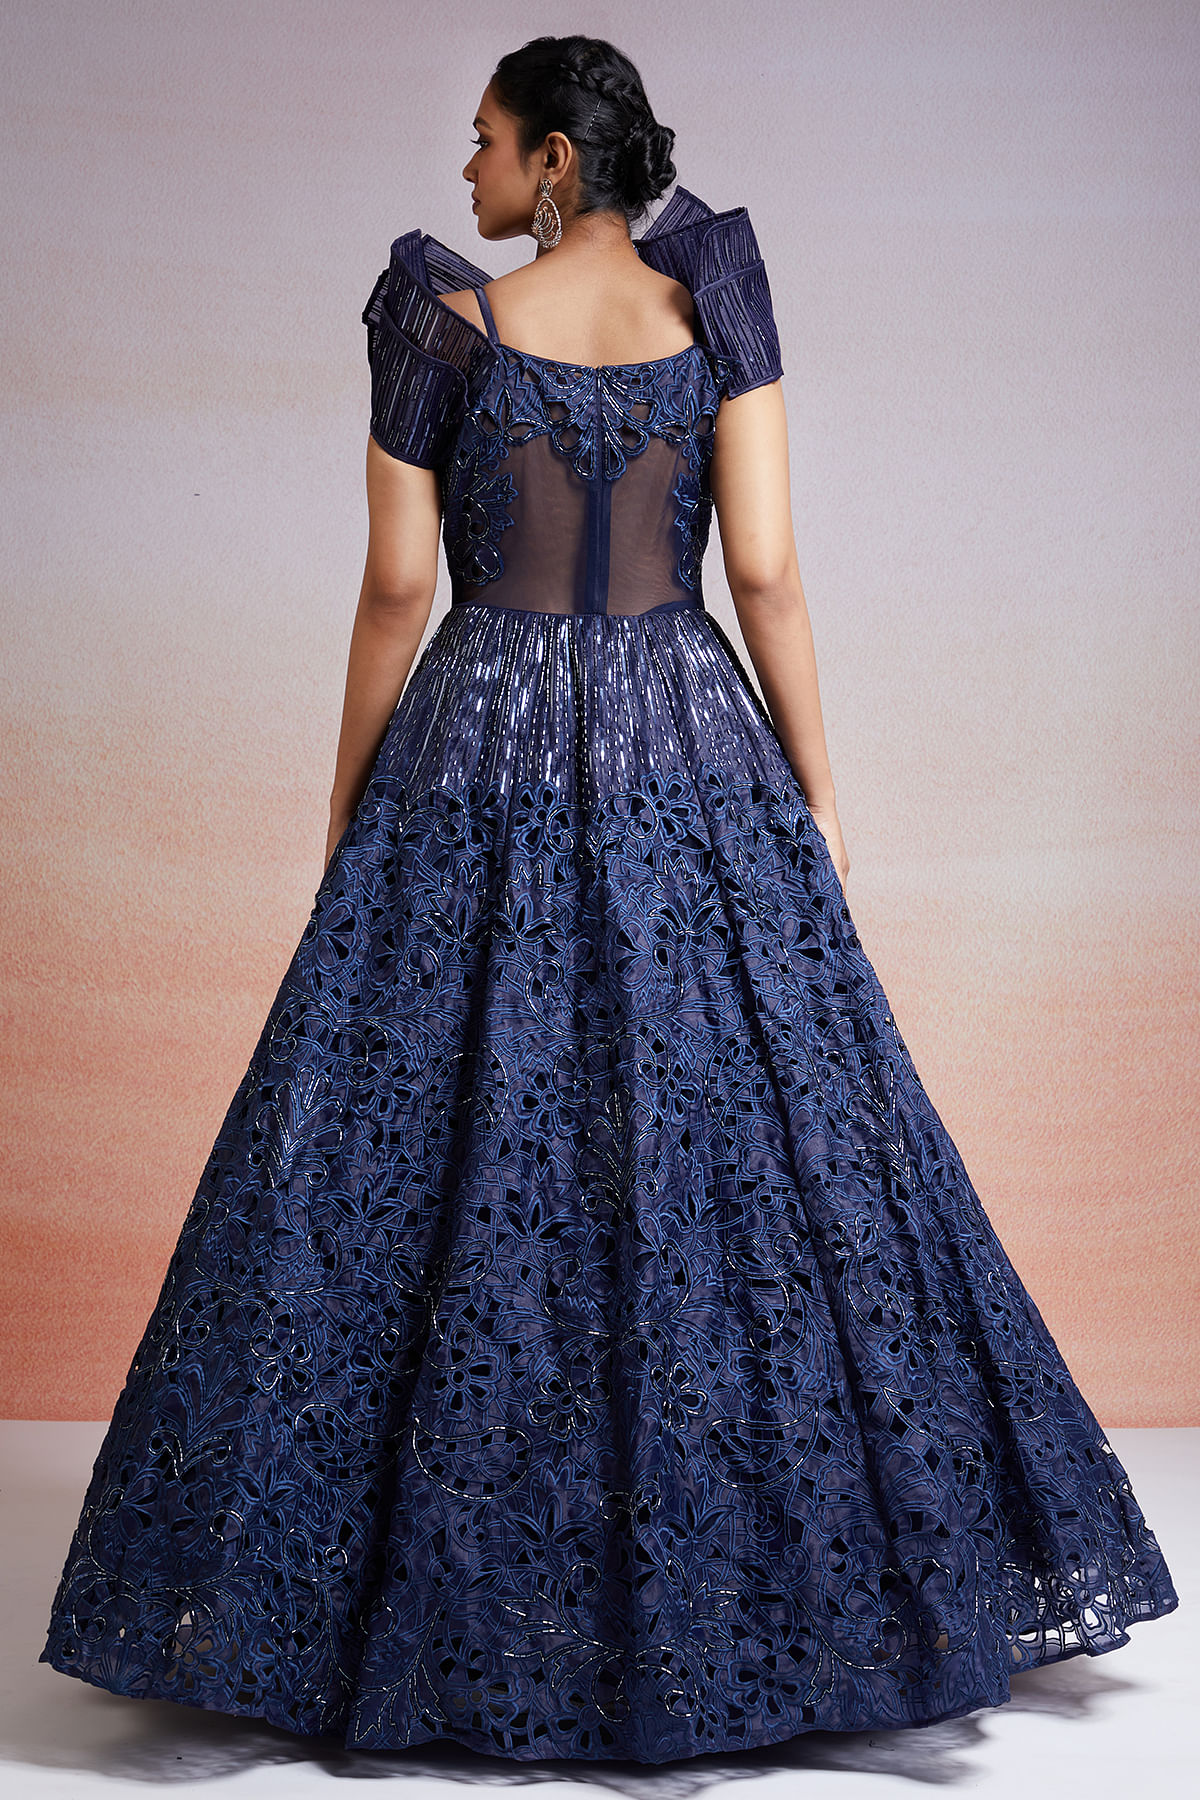 Navy Blue One Shoulder Midnight Blue Evening Gown With Long Sleeves, A Line  Split, Satin Lace, And Beading Perfect For Formal Prom And Soiree In 2021  From Verycute, $42.97 | DHgate.Com